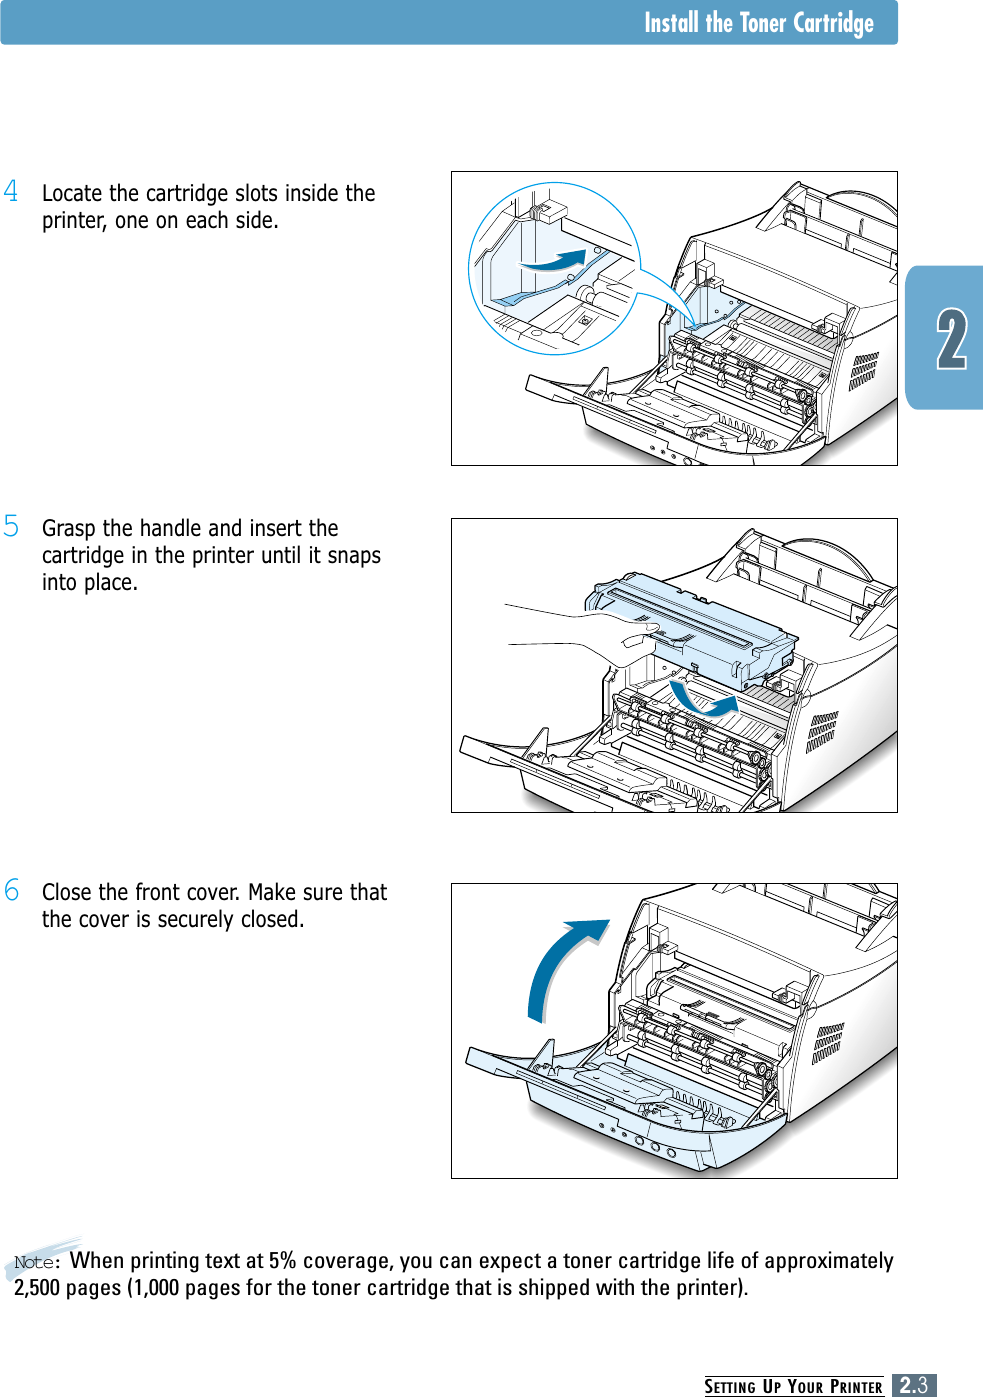 SETTING UPYOUR PRINTER2.3Note: When printing text at 5% coverage, you can expect a toner cartridge life of approximately2,500 pages (1,000 pages for the toner cartridge that is shipped with the printer).5Grasp the handle and insert thecartridge in the printer until it snapsinto place.6Close the front cover. Make sure thatthe cover is securely closed.4Locate the cartridge slots inside theprinter, one on each side.Install the Toner Cartridge